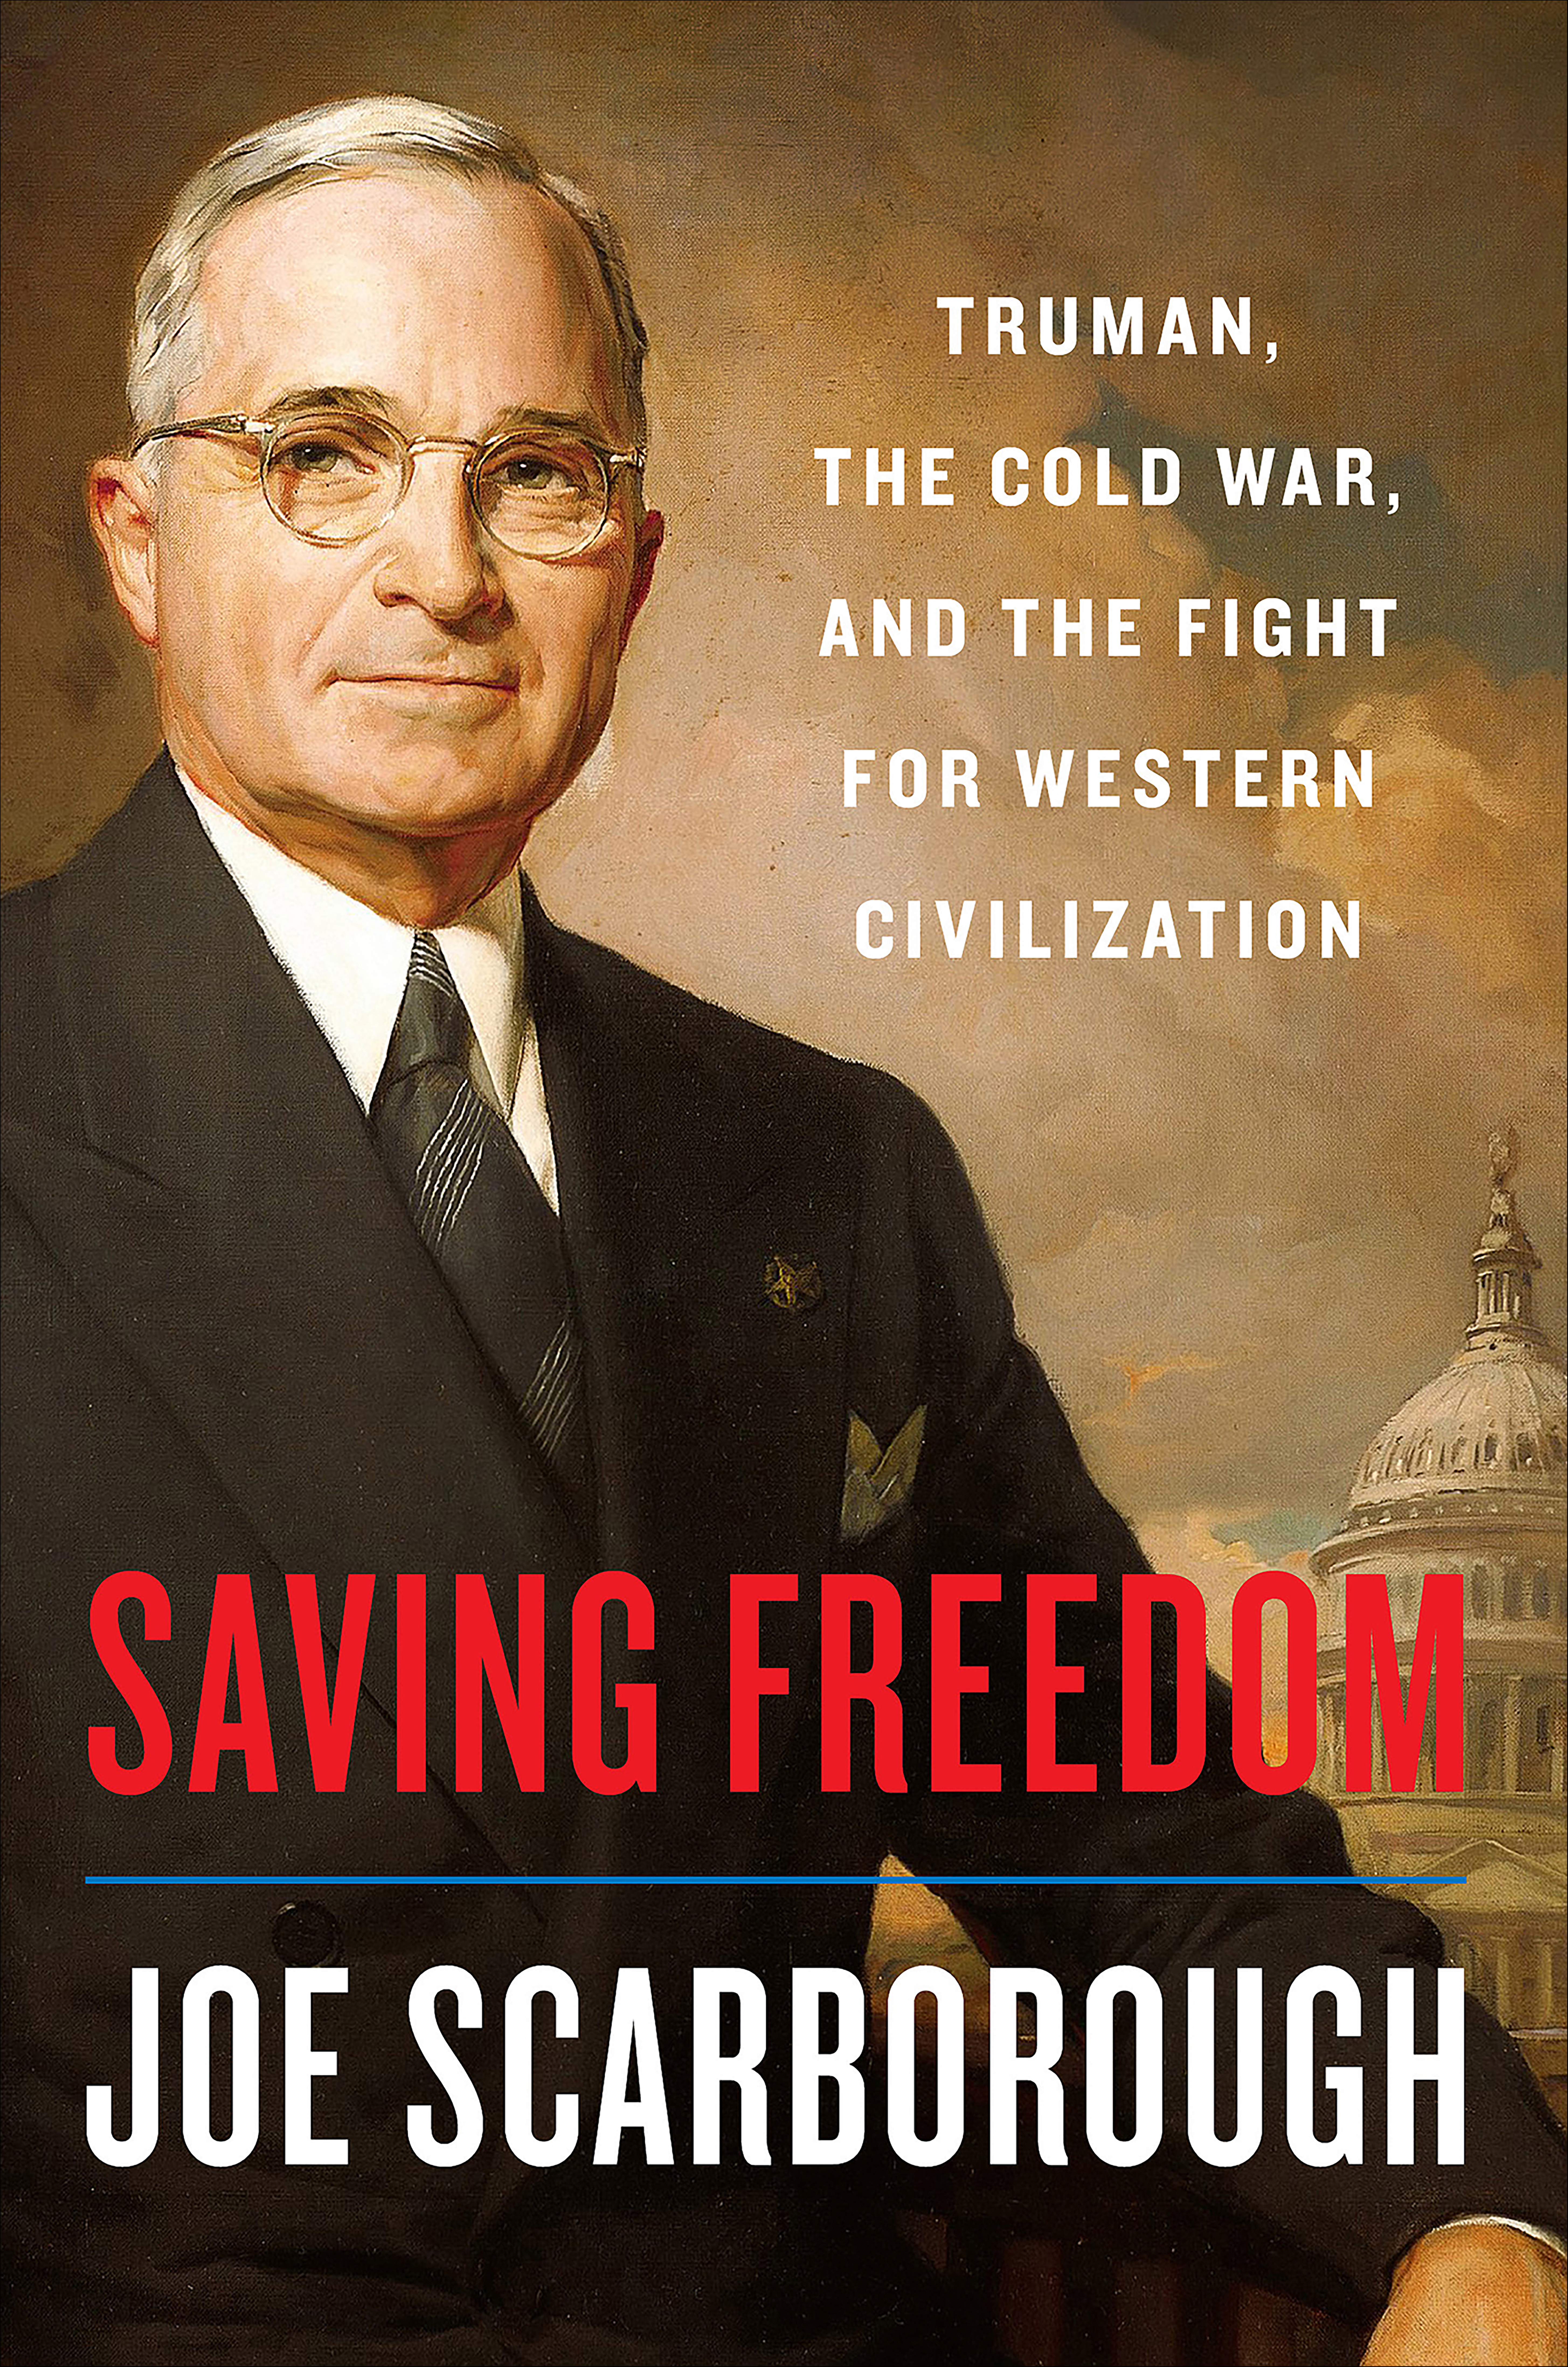 Saving Freedom Truman, the Cold War, and the Fight for Western Civilization cover image